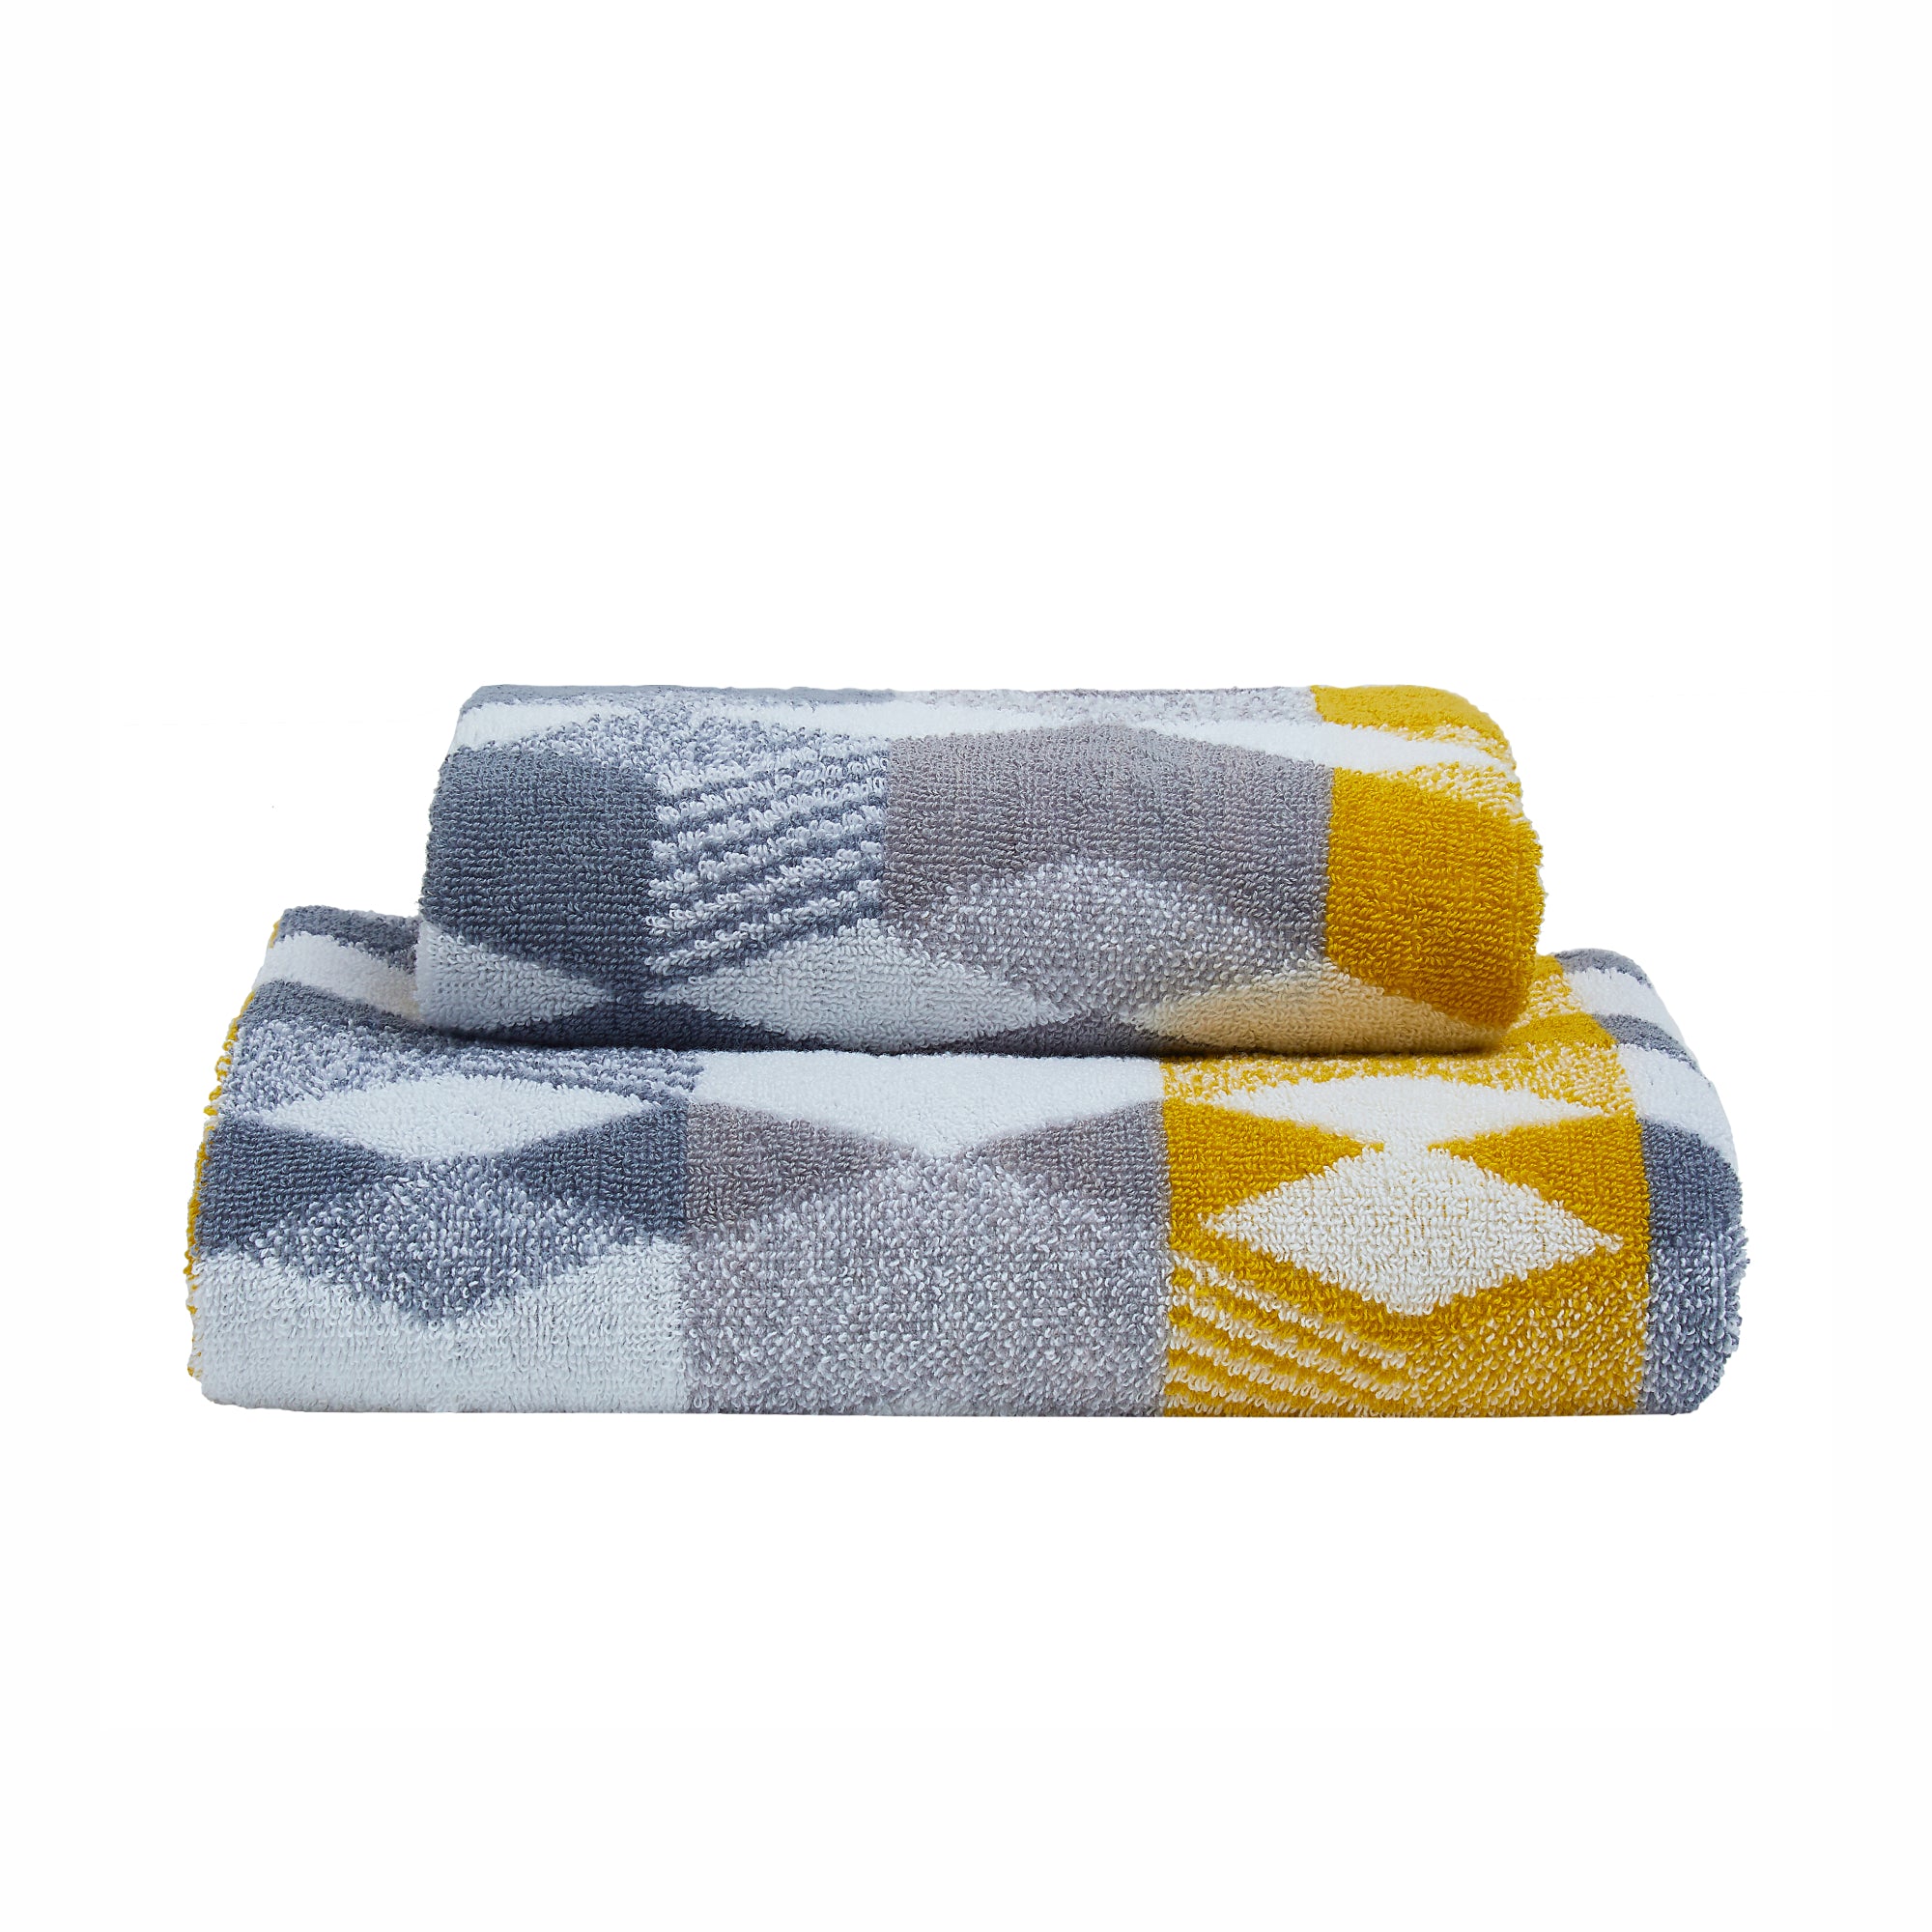 Hexagon Hand and Bath Towels by Fusion Bathroom in Grey